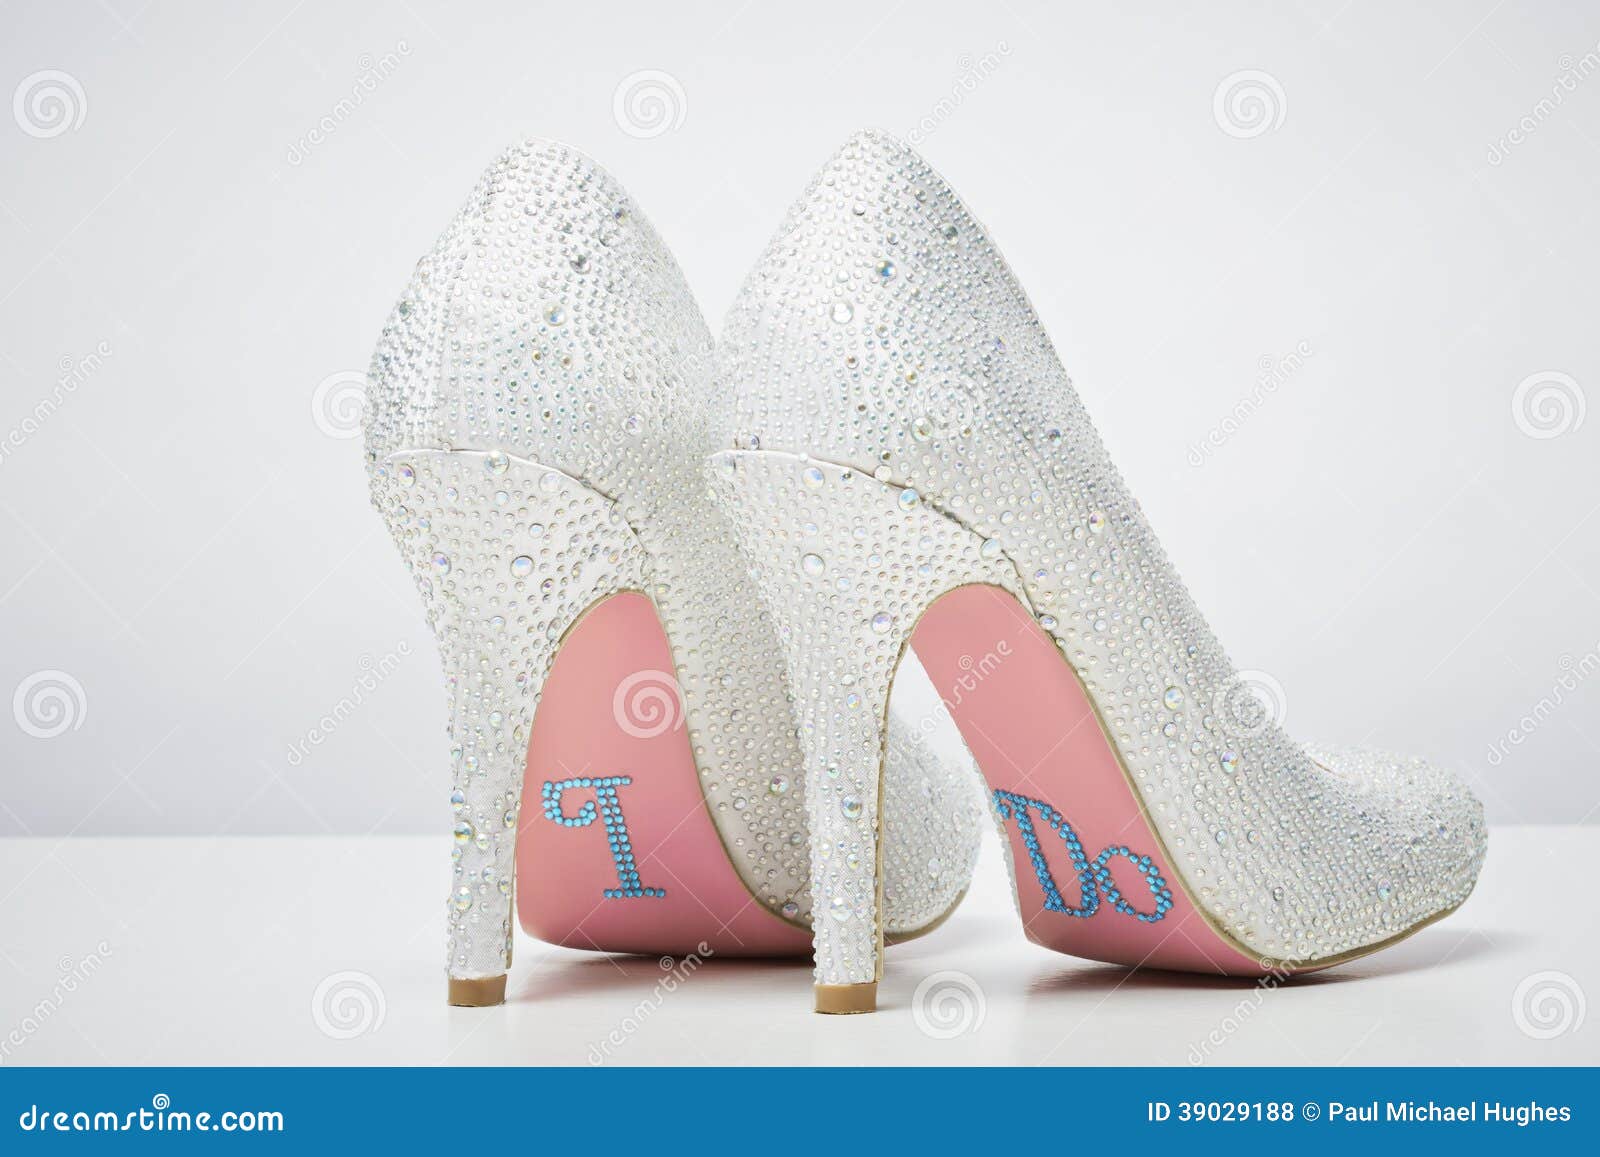 Bridal Wedding Shoes With I Do Message On Sole Isolated On White  Background. Marriage Concept Stock Photo, Picture and Royalty Free Image.  Image 26818048.